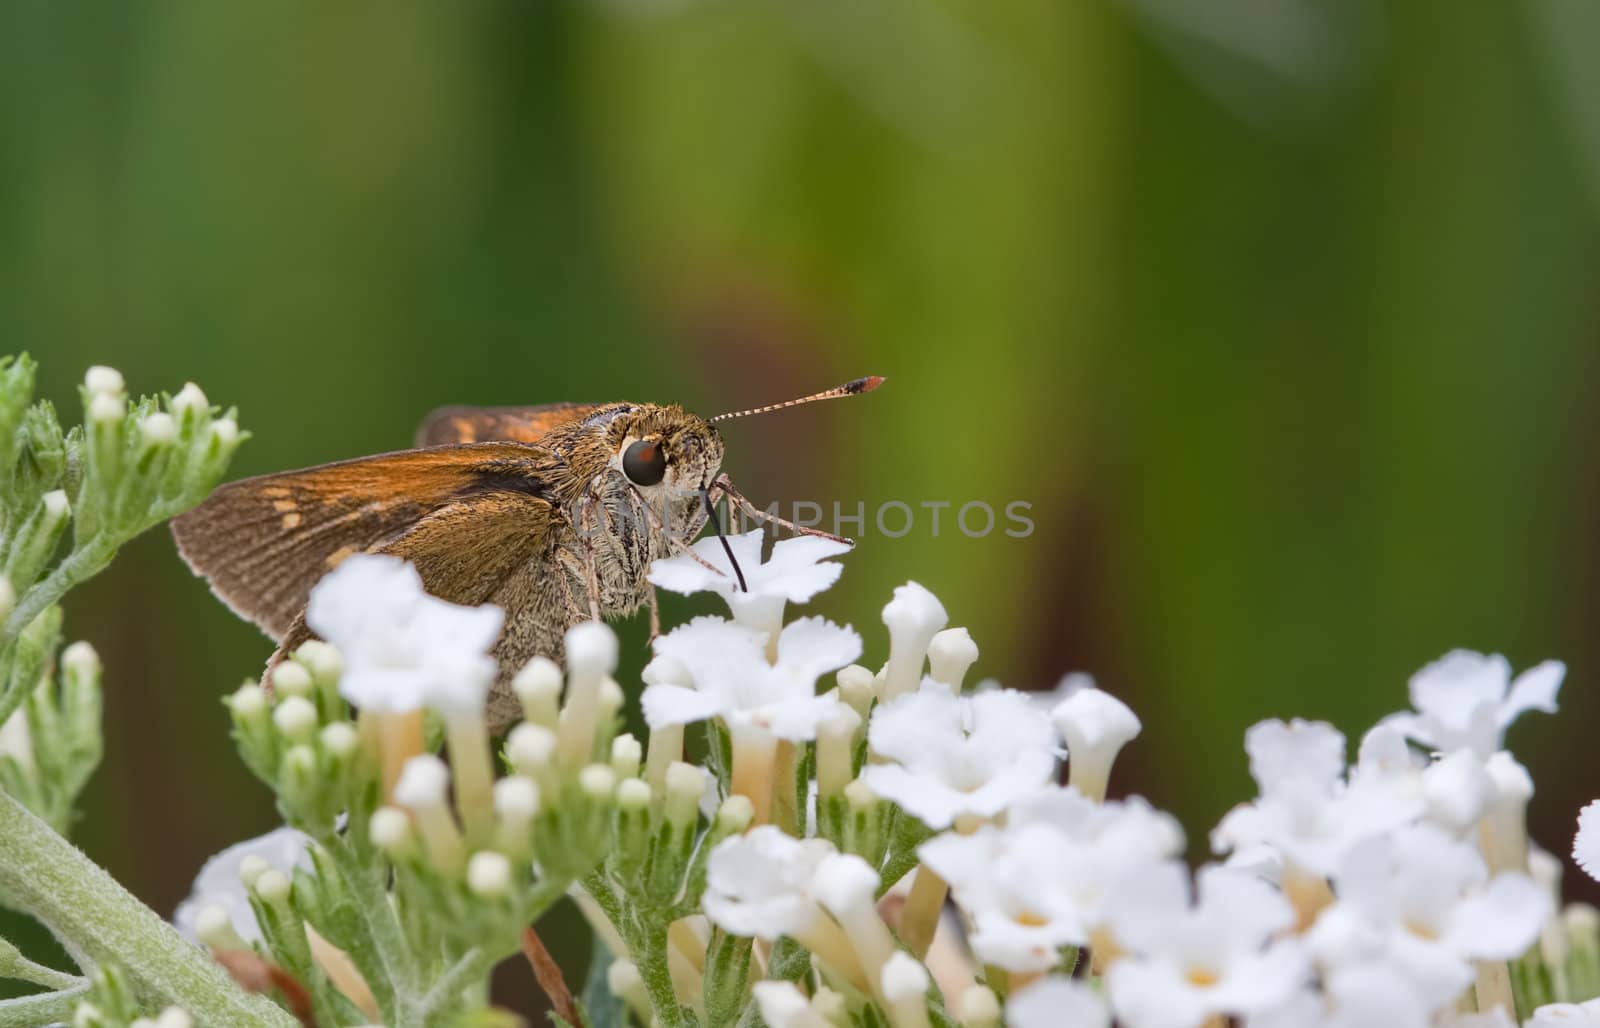 A Silver-Spotted Skipper Butterfly Sucking Nectar from a flower in a garden. The butterfly tongue is clearly seen inserted into the flower.